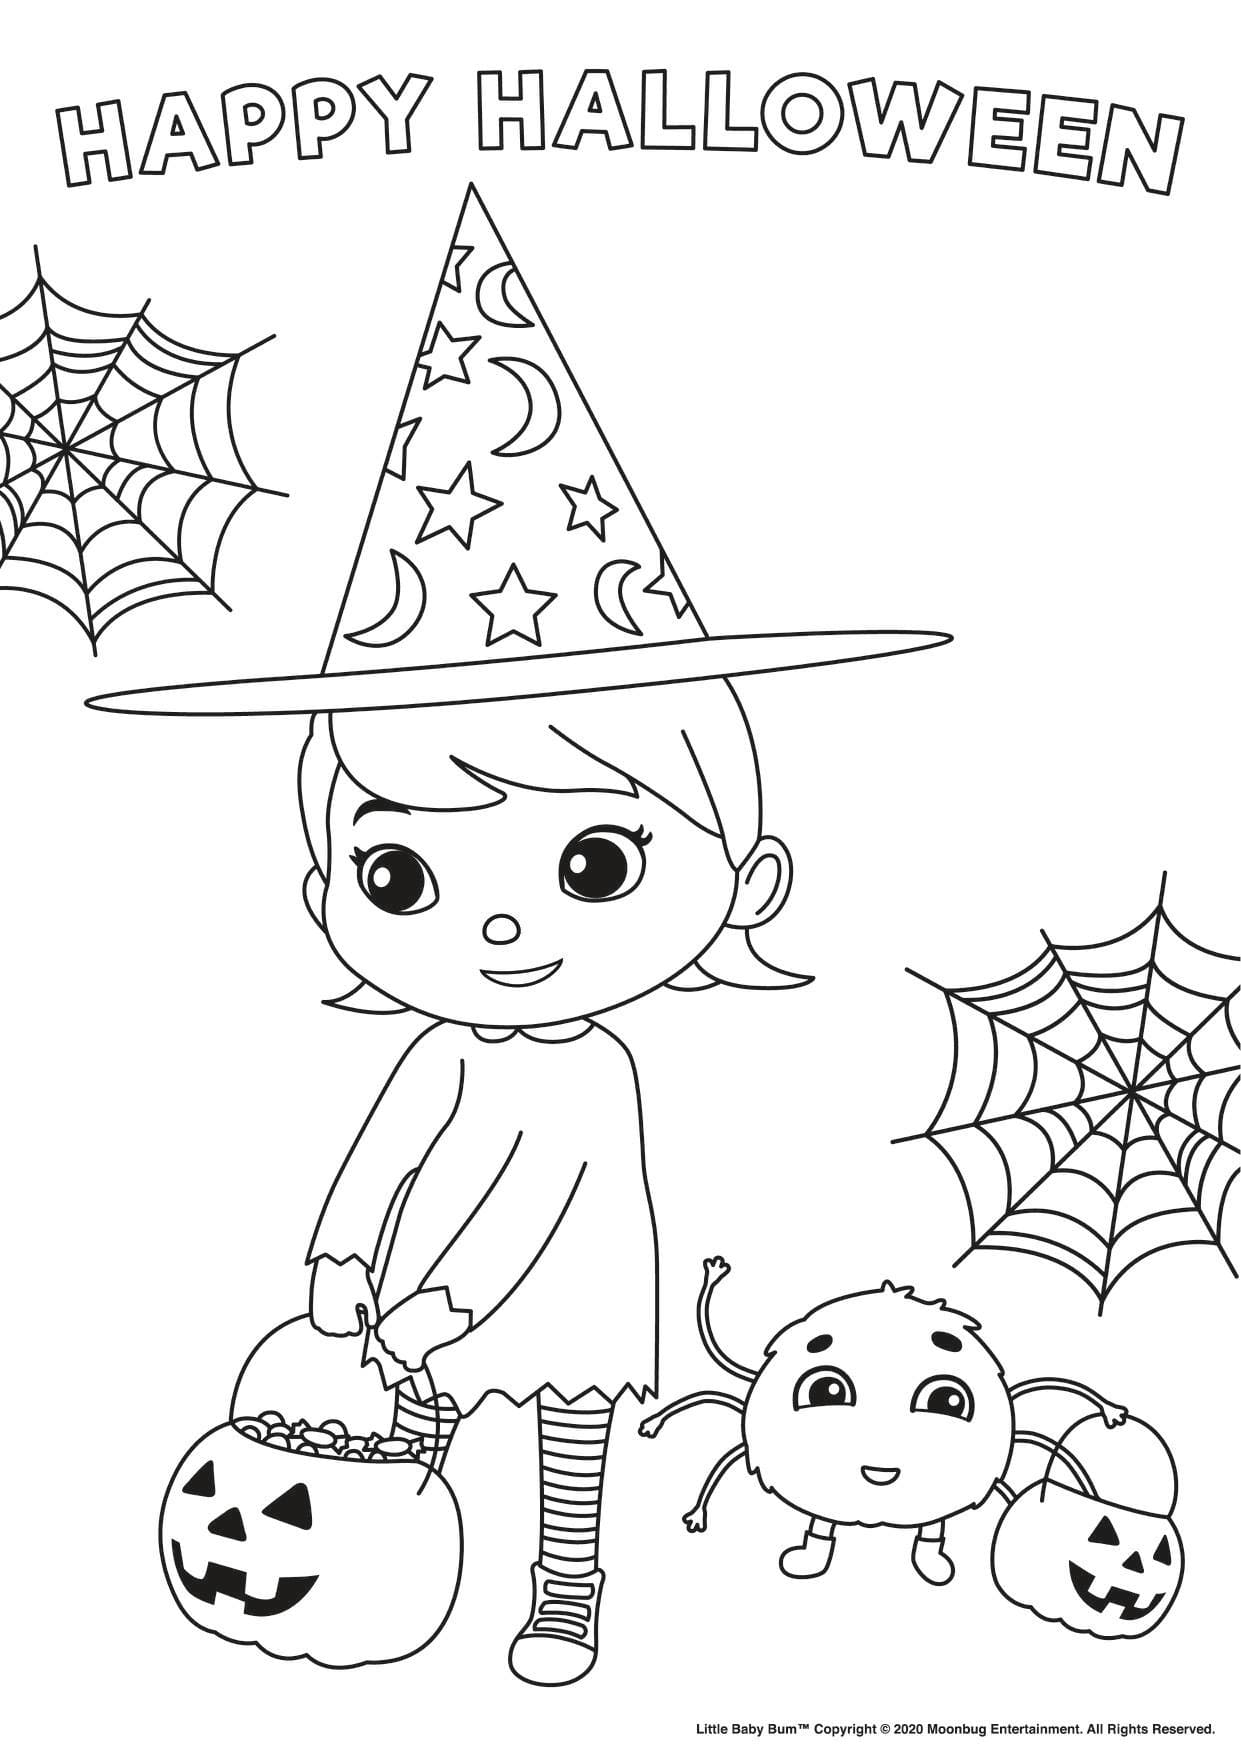 Coloring page Little Baby Bum Happy Halloween!